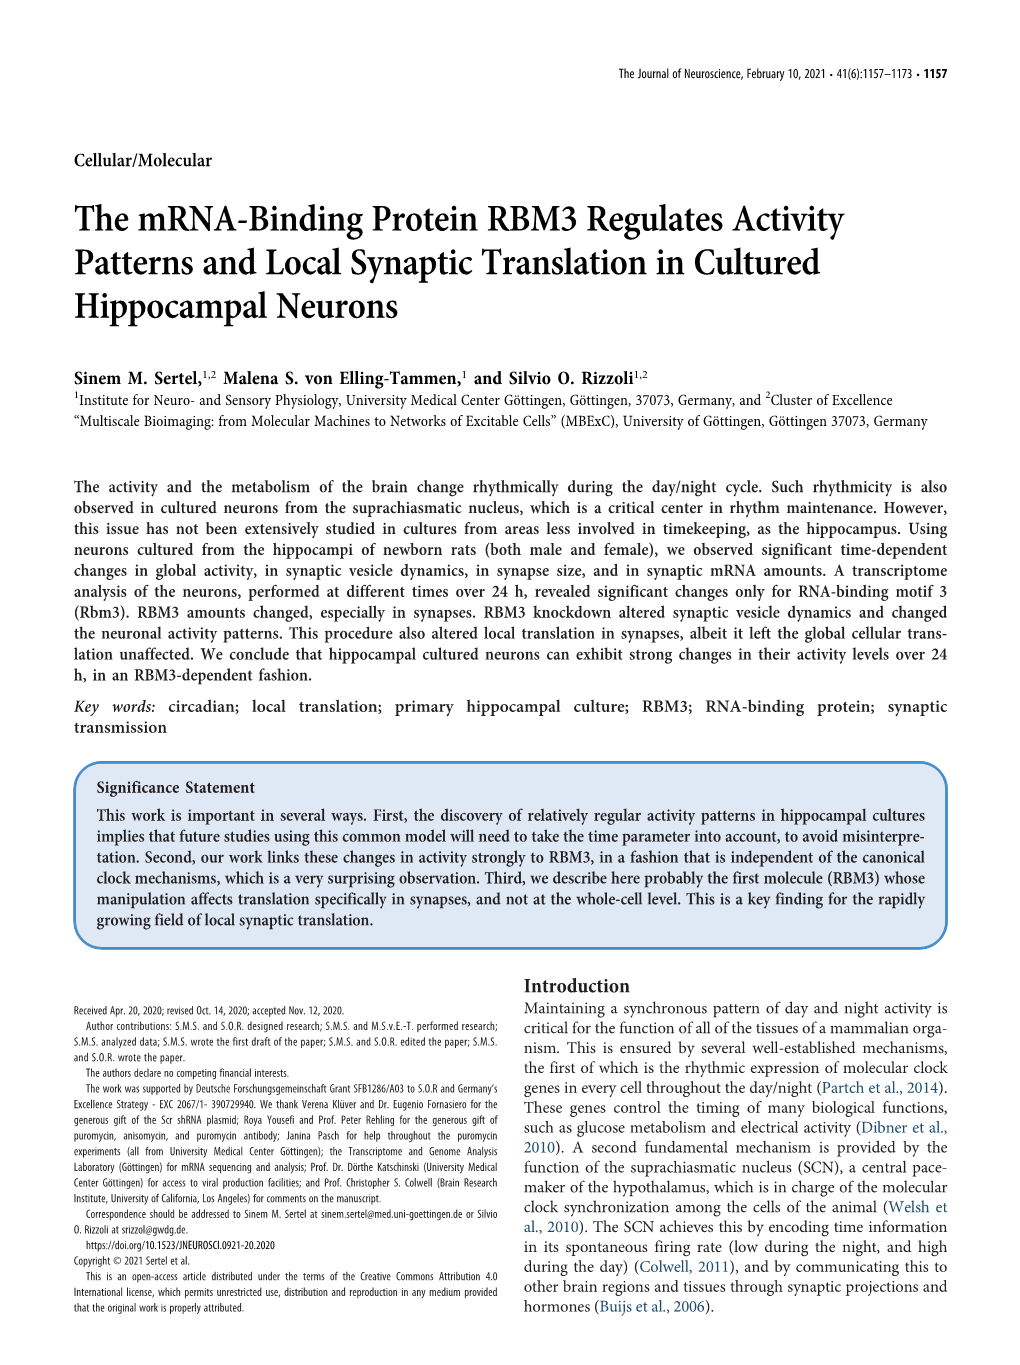 The Mrna-Binding Protein RBM3 Regulates Activity Patterns and Local Synaptic Translation in Cultured Hippocampal Neurons